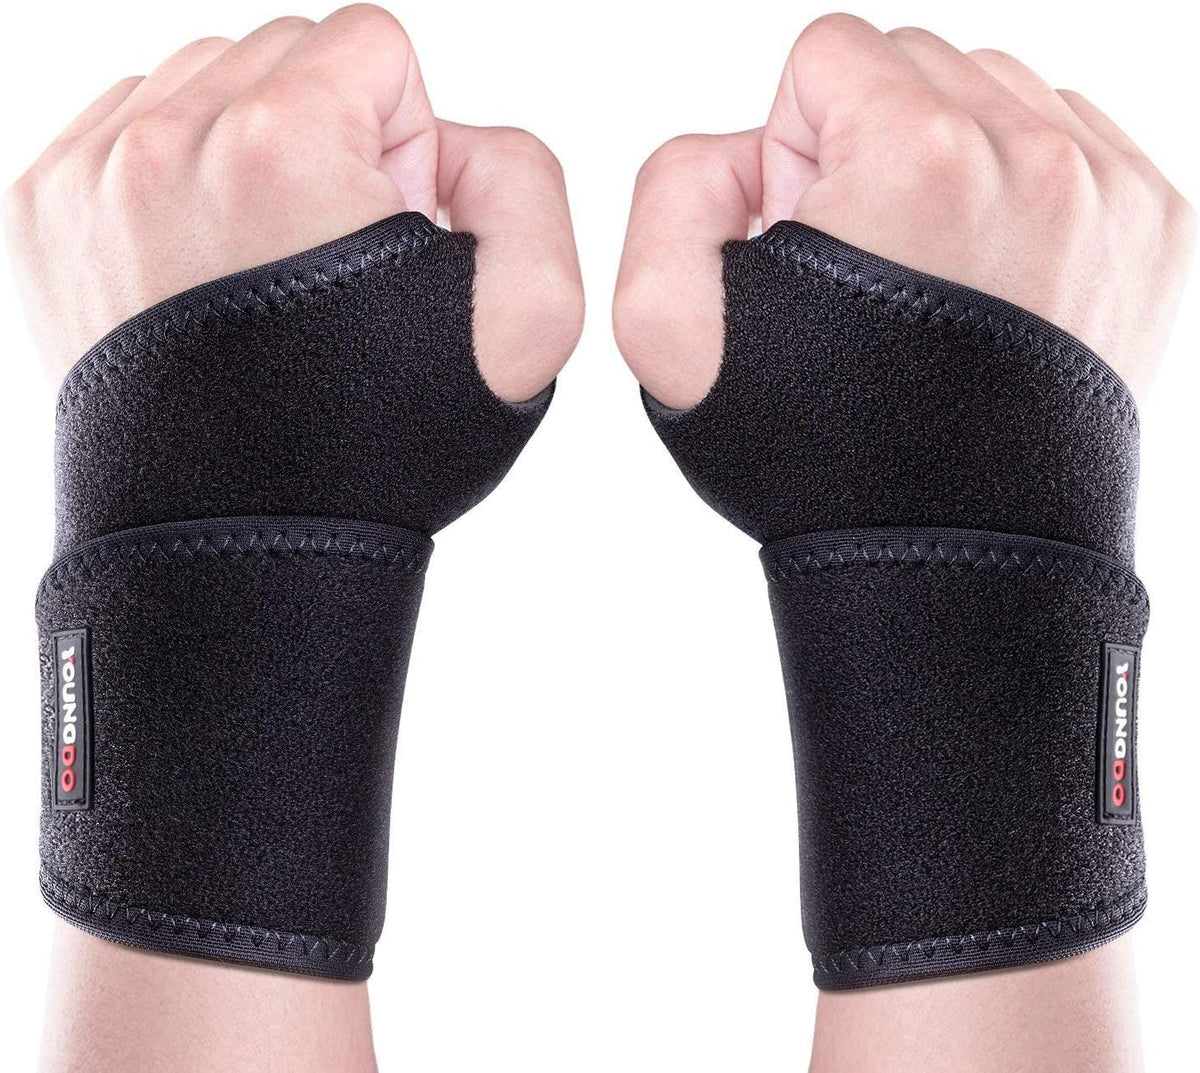 YOUNGDO Sports Wrist Brace, 7-11” Adjustable Wrist Support Wraps Thumb Loops Men & Women, Ideal Tennis Basketball Badminton Volleyball Cycling Gym Fitness (1 Pair) (7"-11" Wrist Brace)